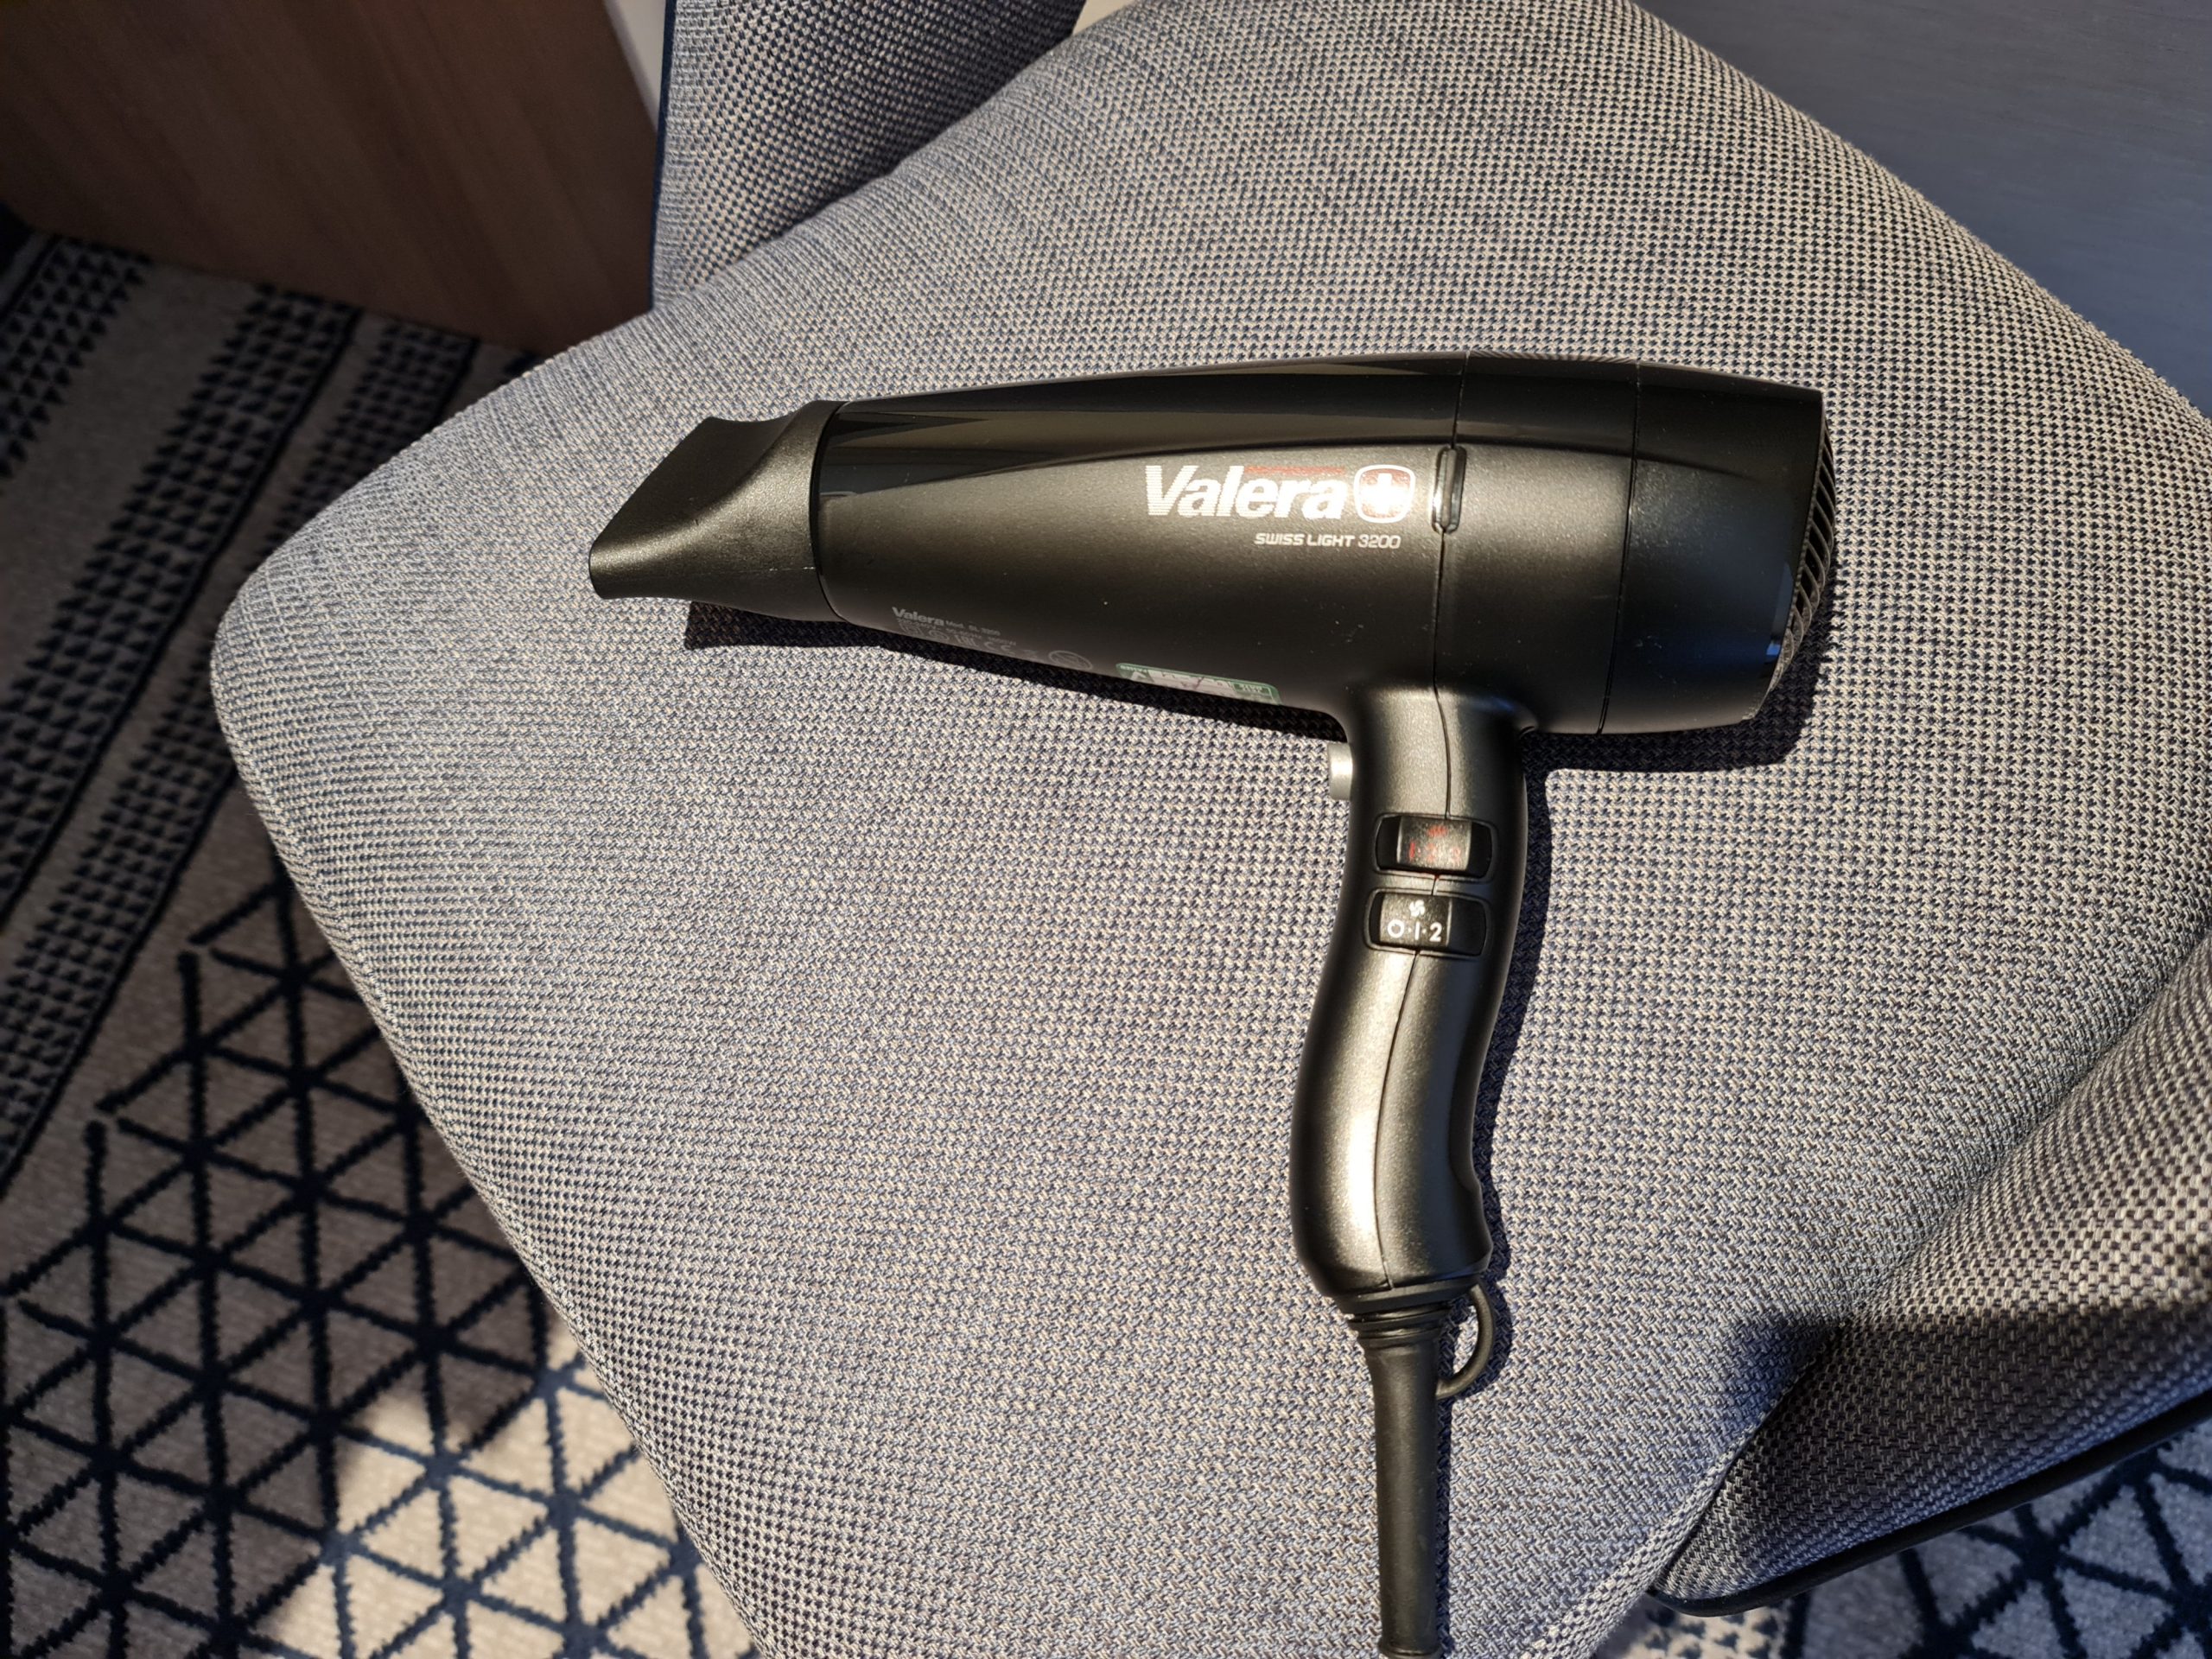 P&O Iona Accessible Balcony Cabin 12514 Review hairdryer